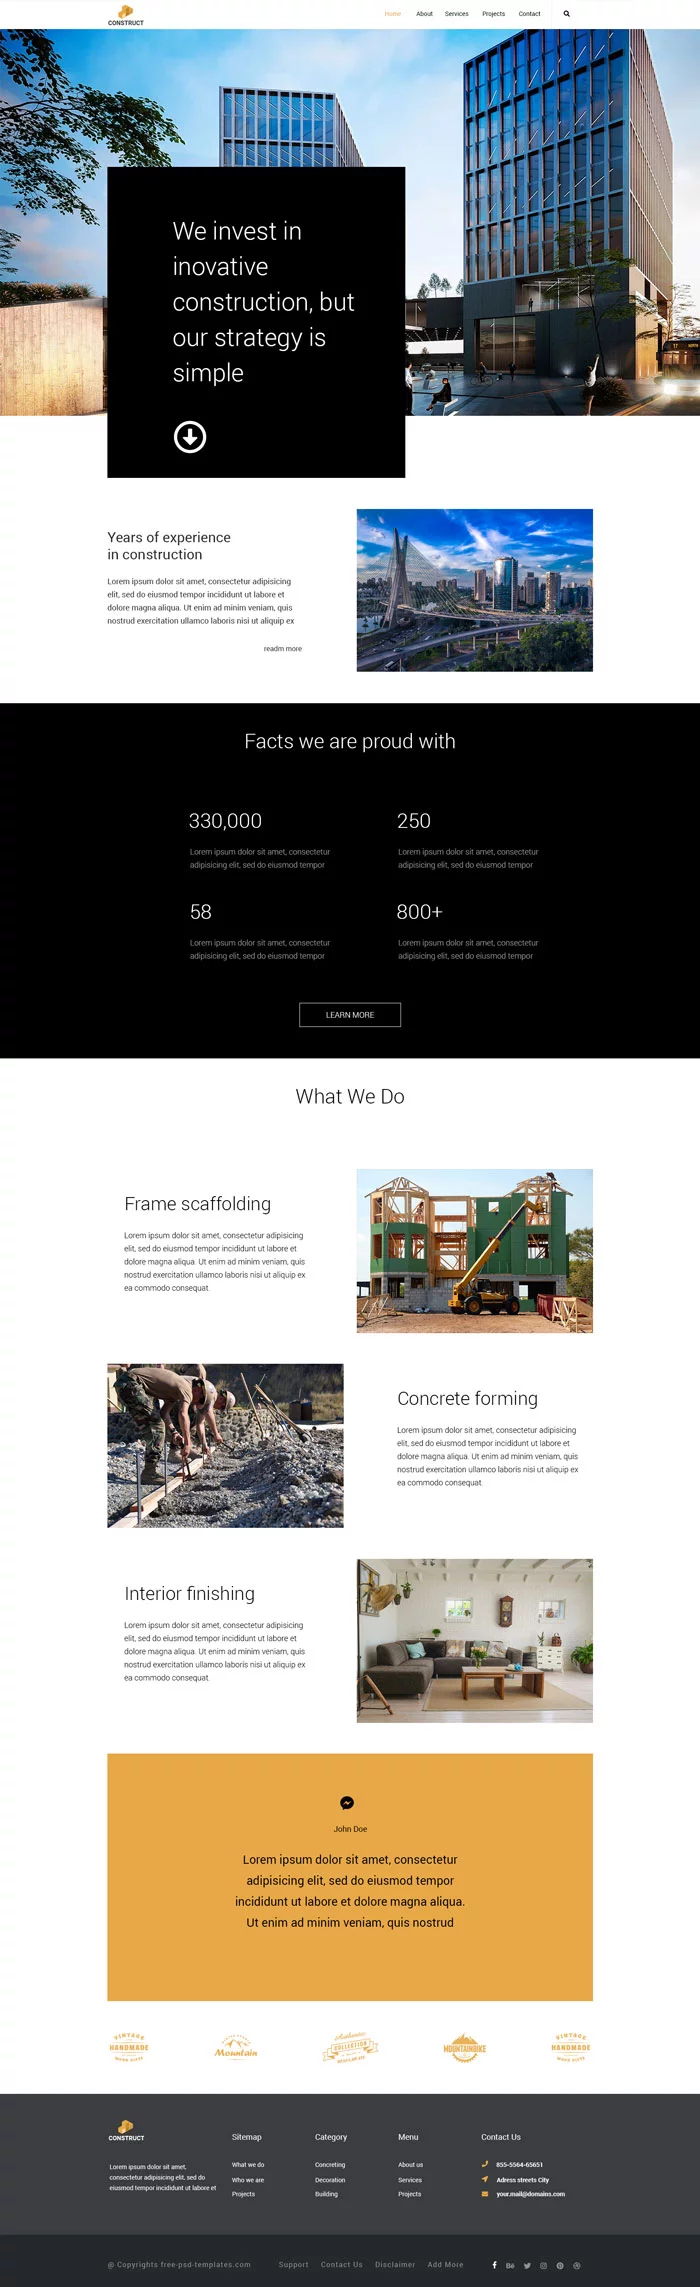 FREE PSD TEMPLATE CONSTRUCTION WEB SITE